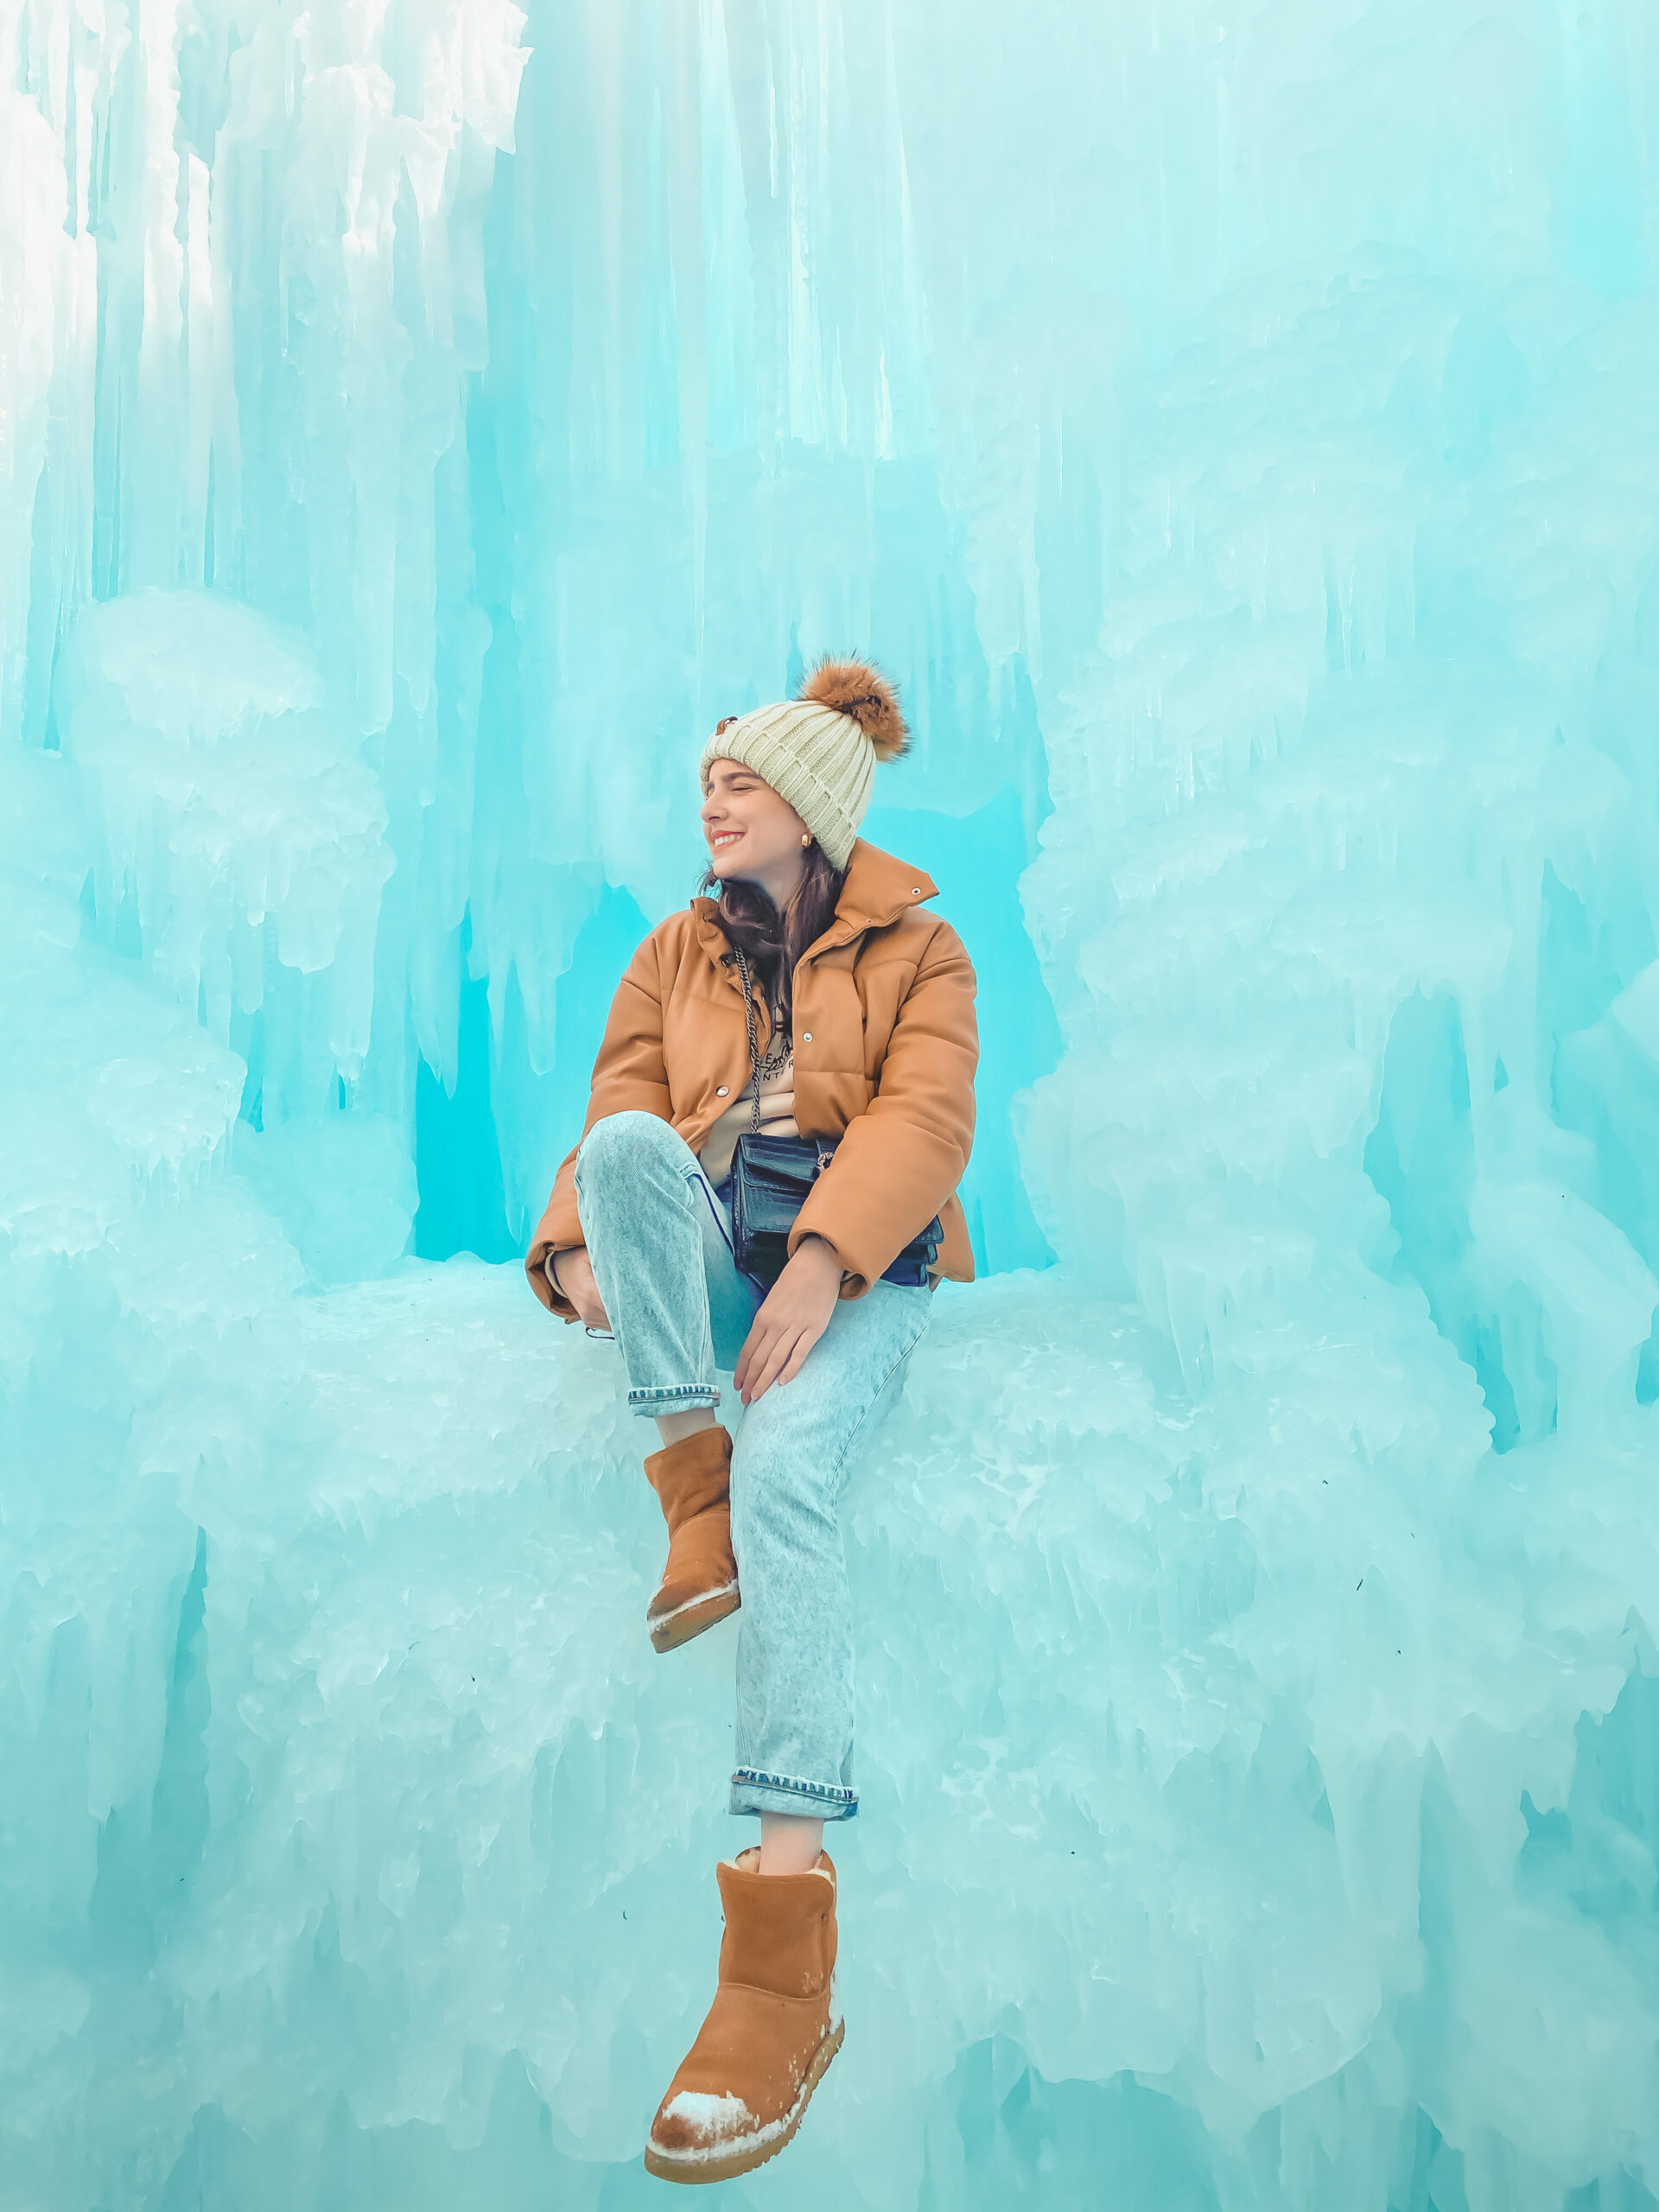 5 Tips for Visiting the Ice Castles in Midway, UT